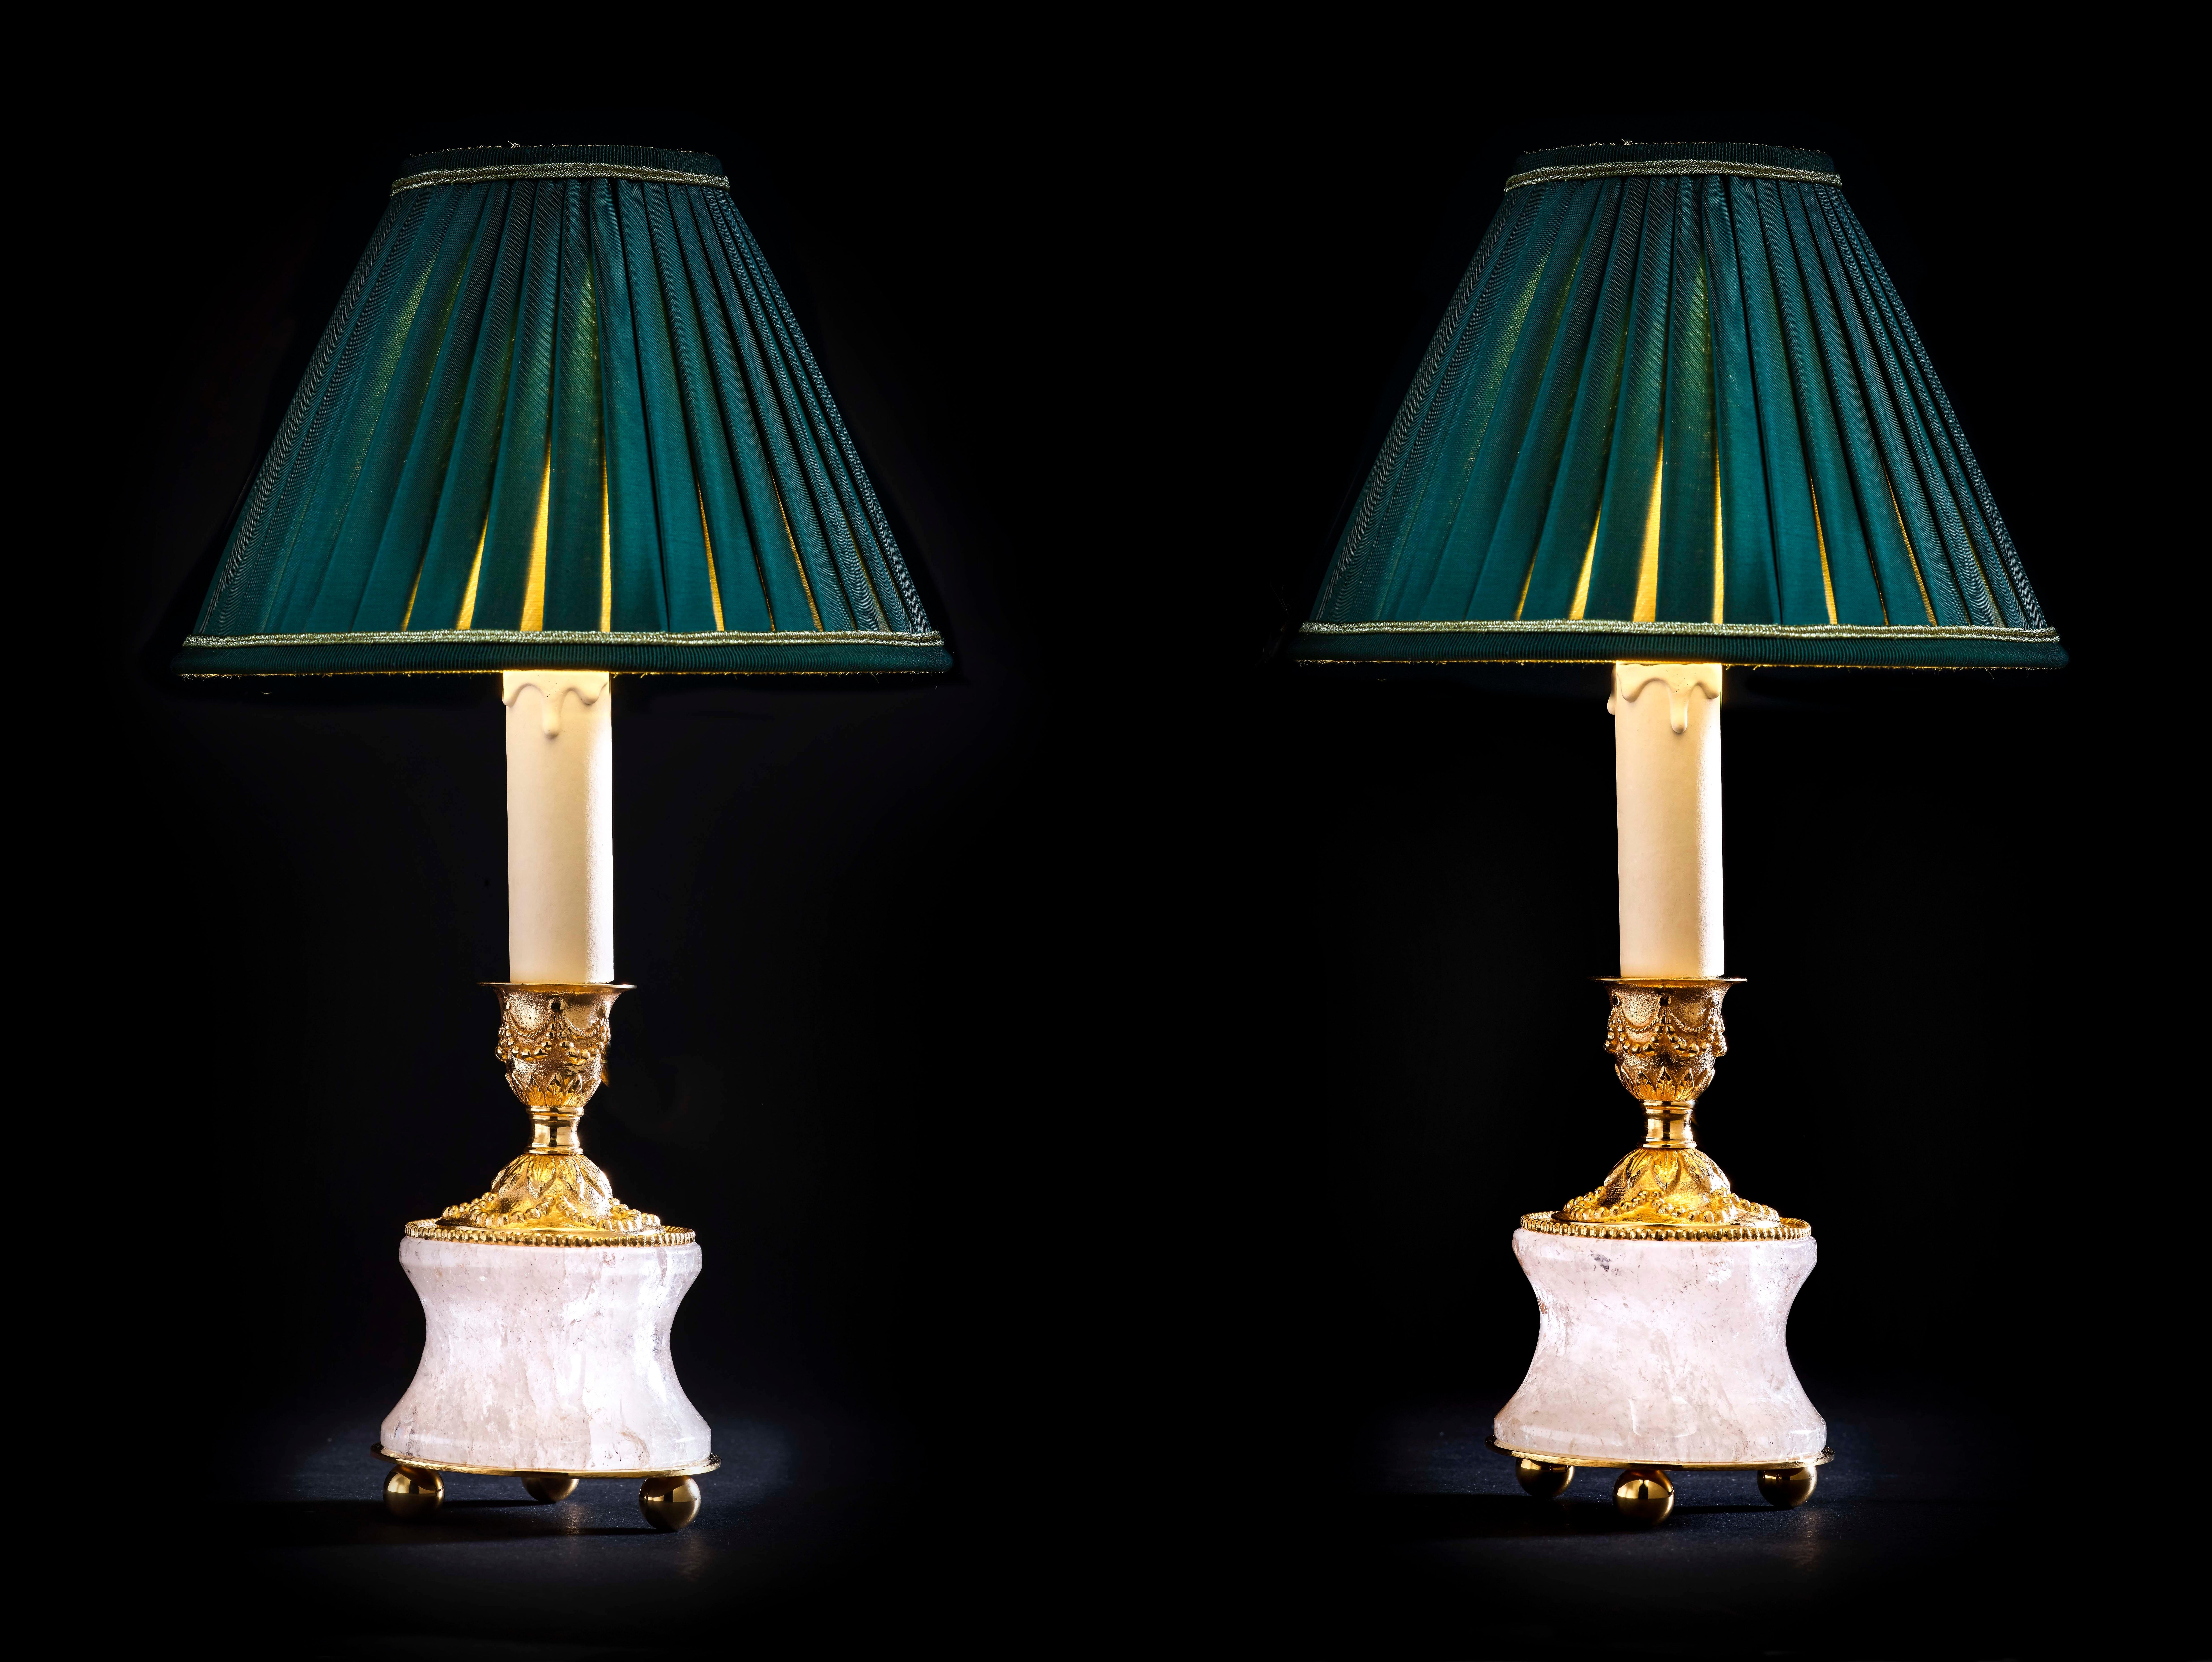 Rock crystal Louis the XVIth style 24-karat ormolu gilding bronze Empire green lampshades made by Alexandre Vossion.
This model can be also used as candlesticks to make your dining table so chic.
Model I of four different models.
Handmade in